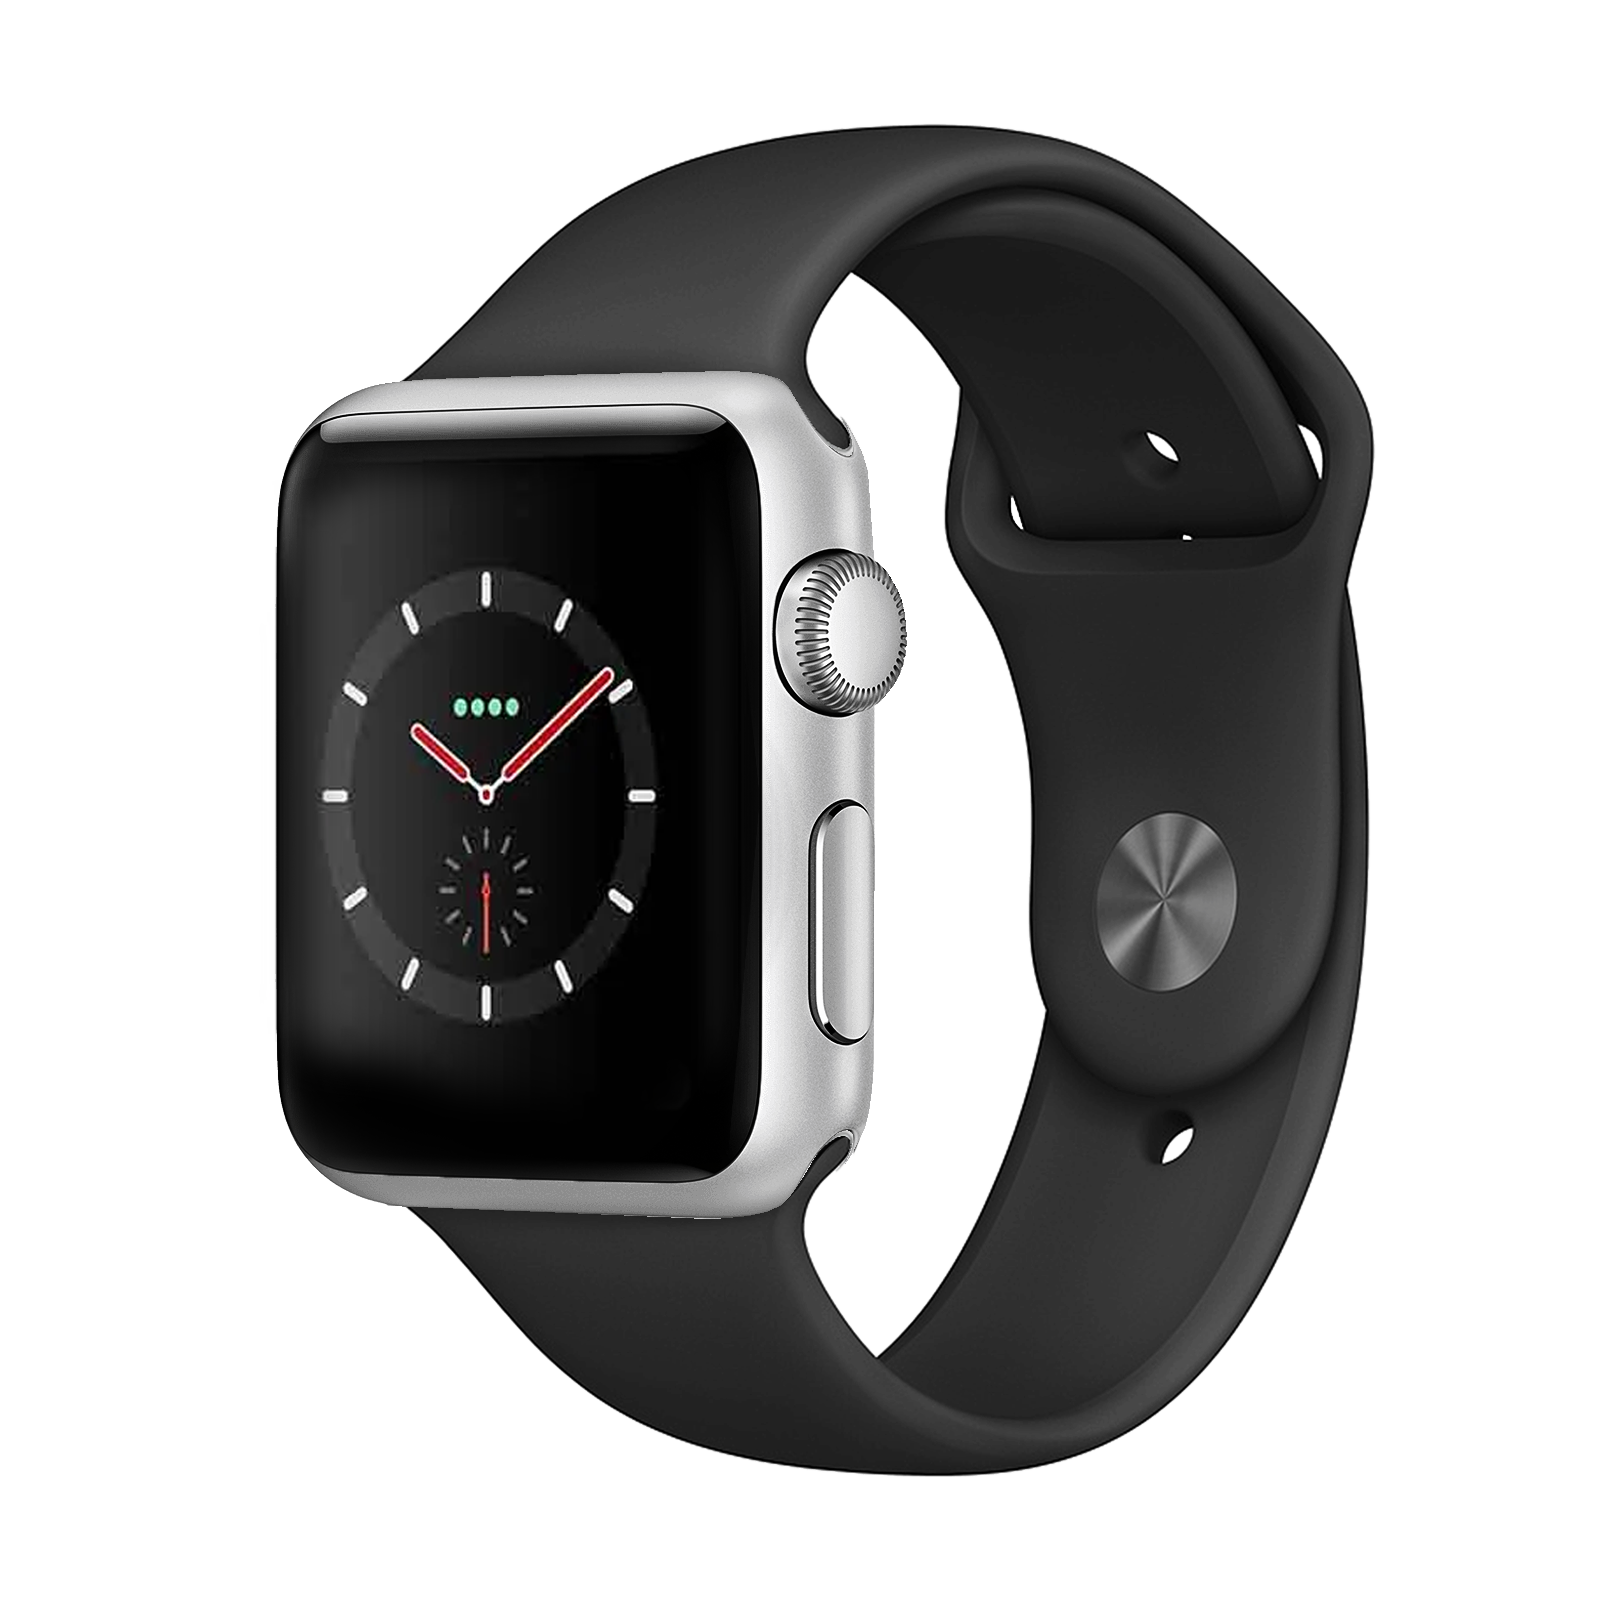 Apple Watch Series 3 Stainless 38mm Silver Very Good - WiFi